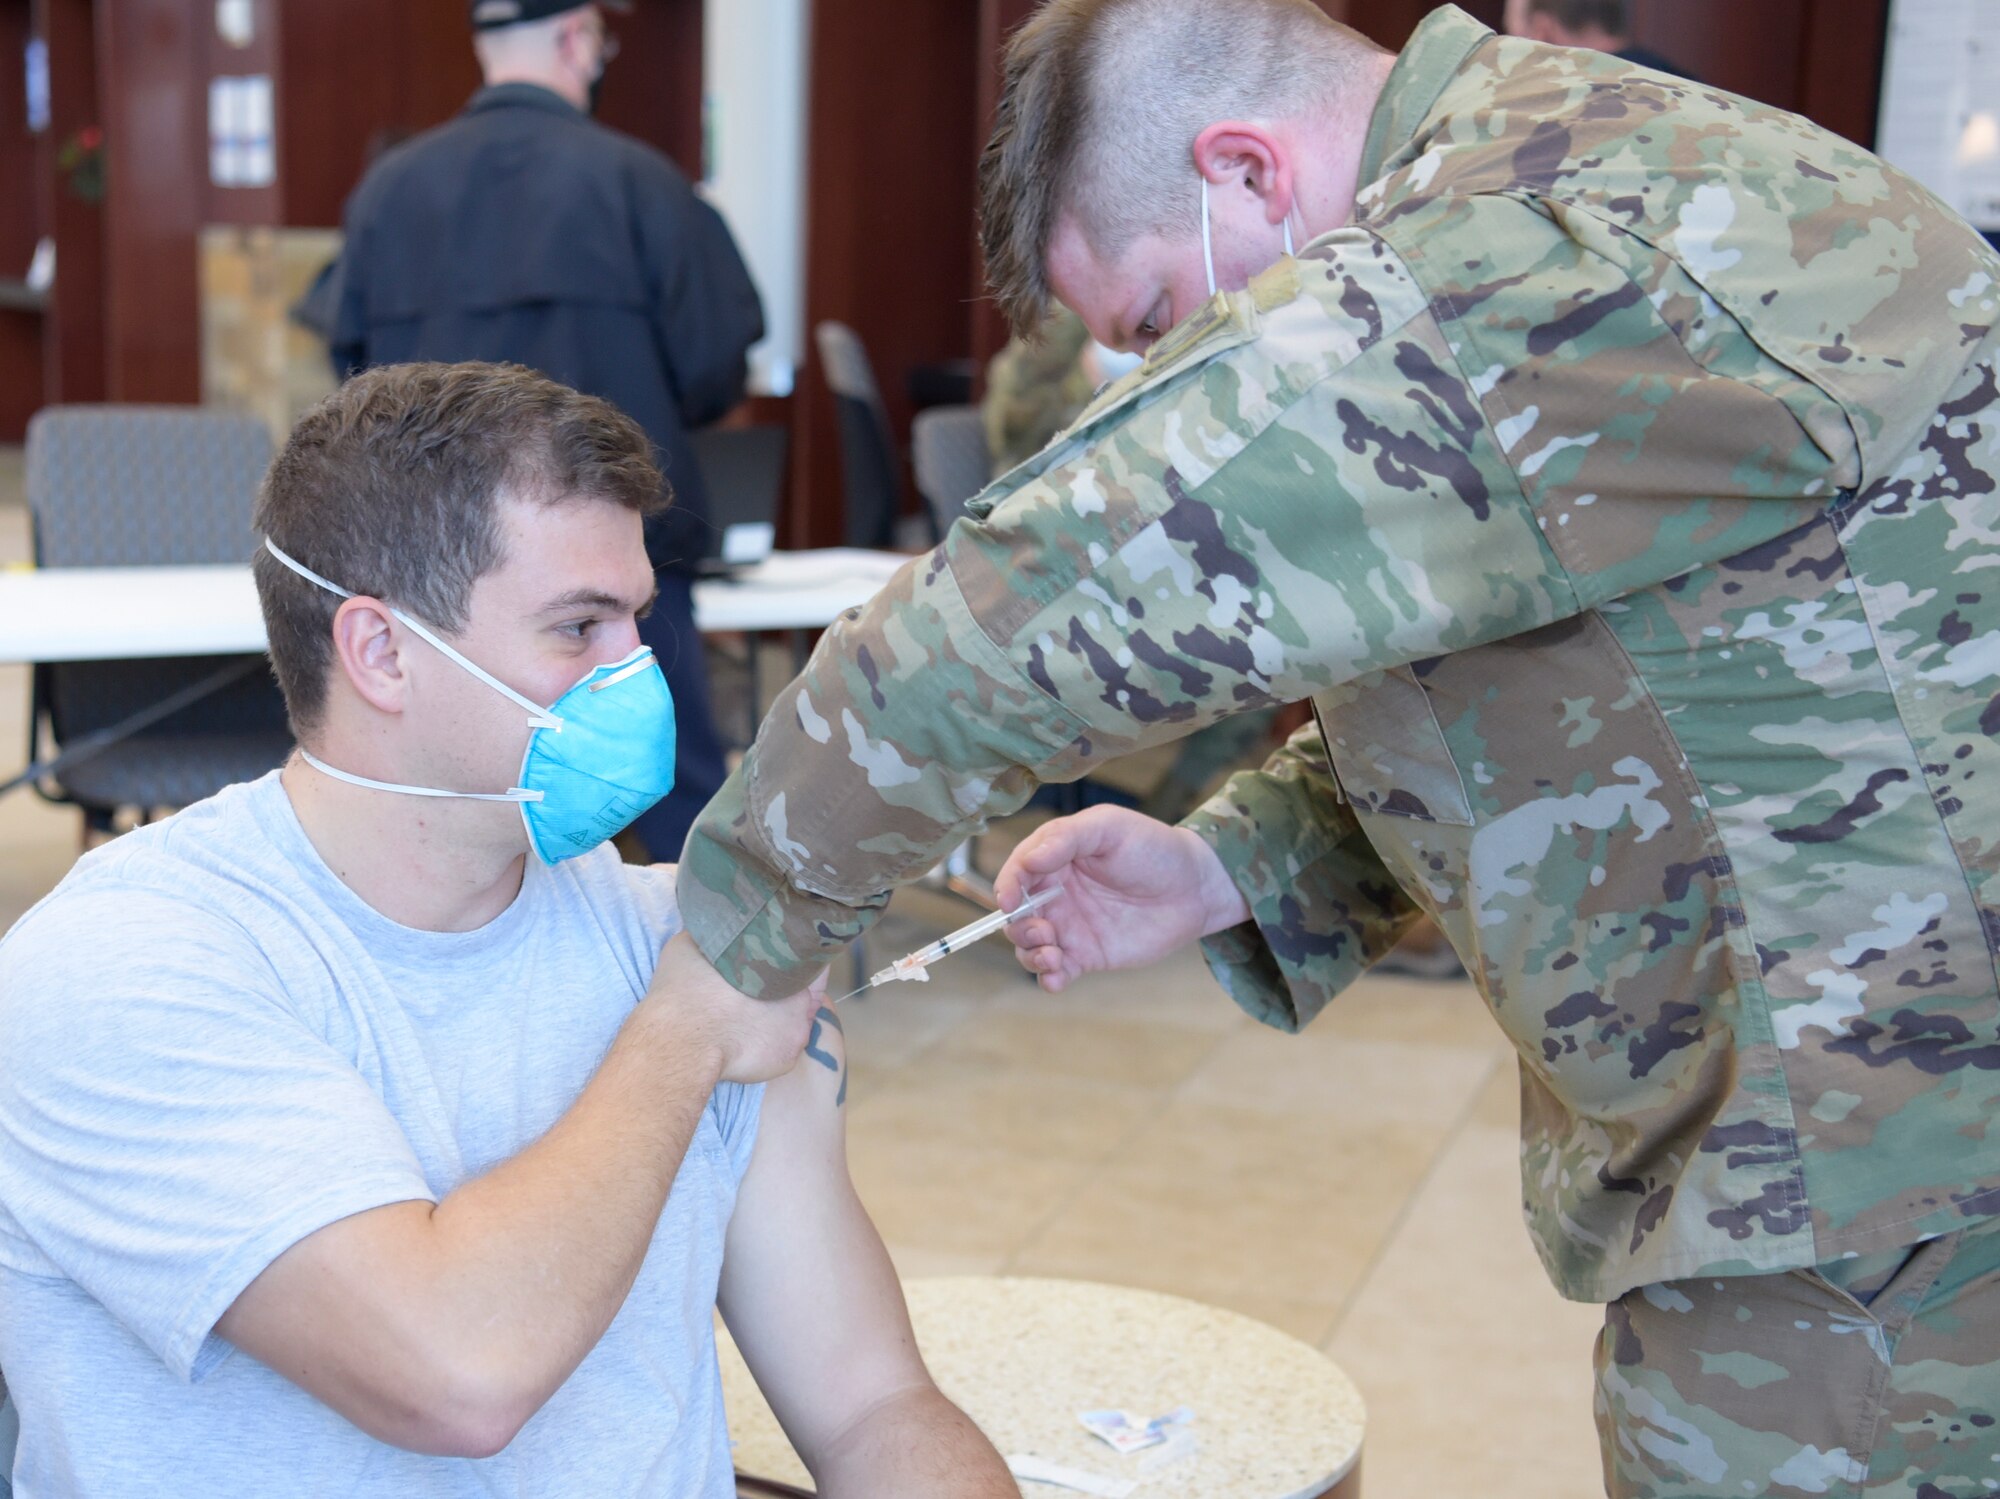 Man gets vaccination from a man in military uniform